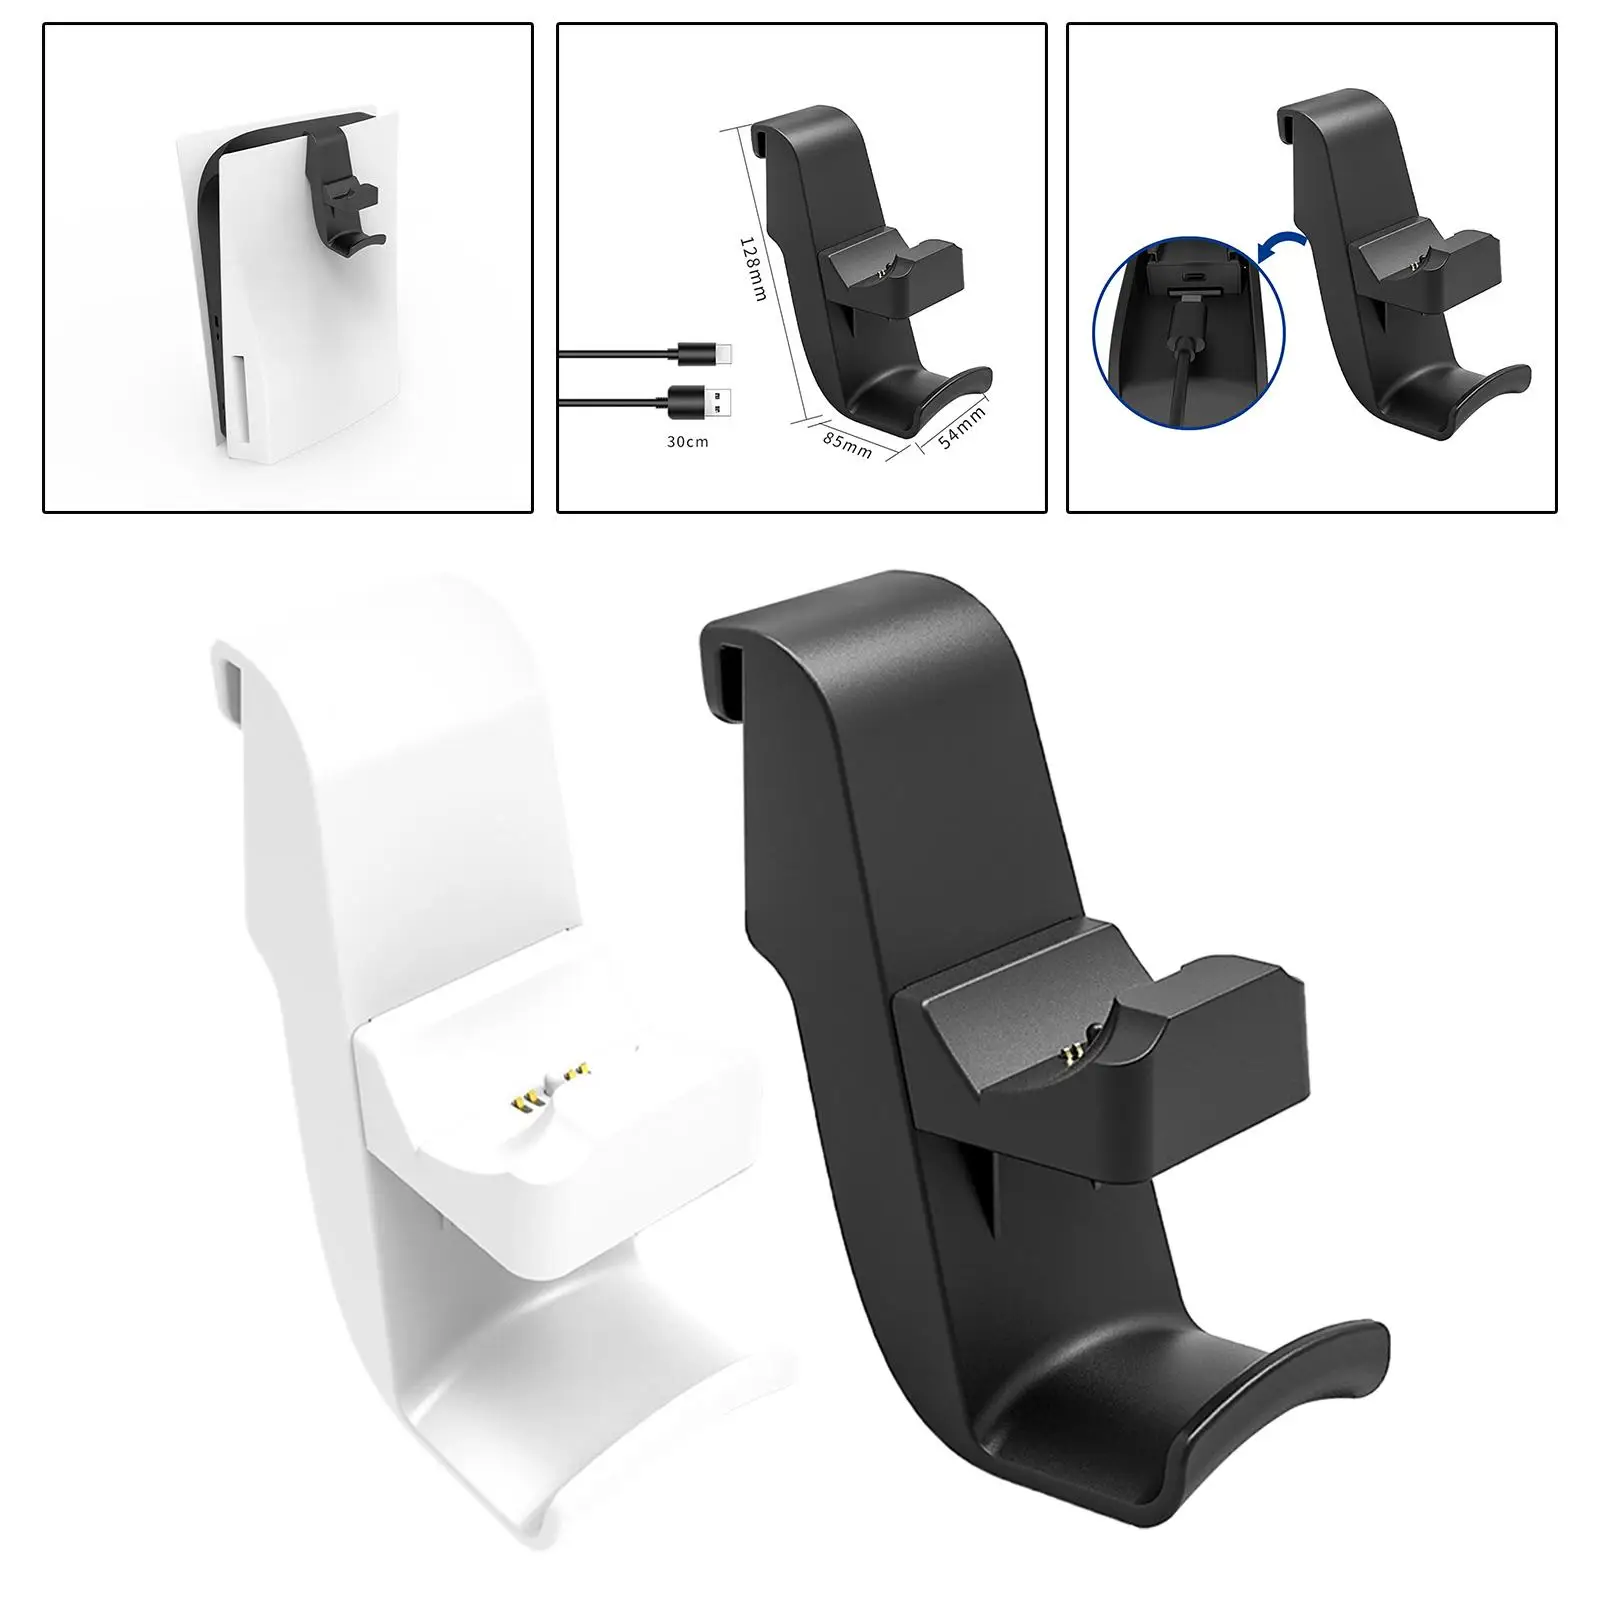 2 in 1 Headset and Controller Holder Charging Cradle Smart Charging Dock Controller Charger Headphone Hanger for PS5 Accessory